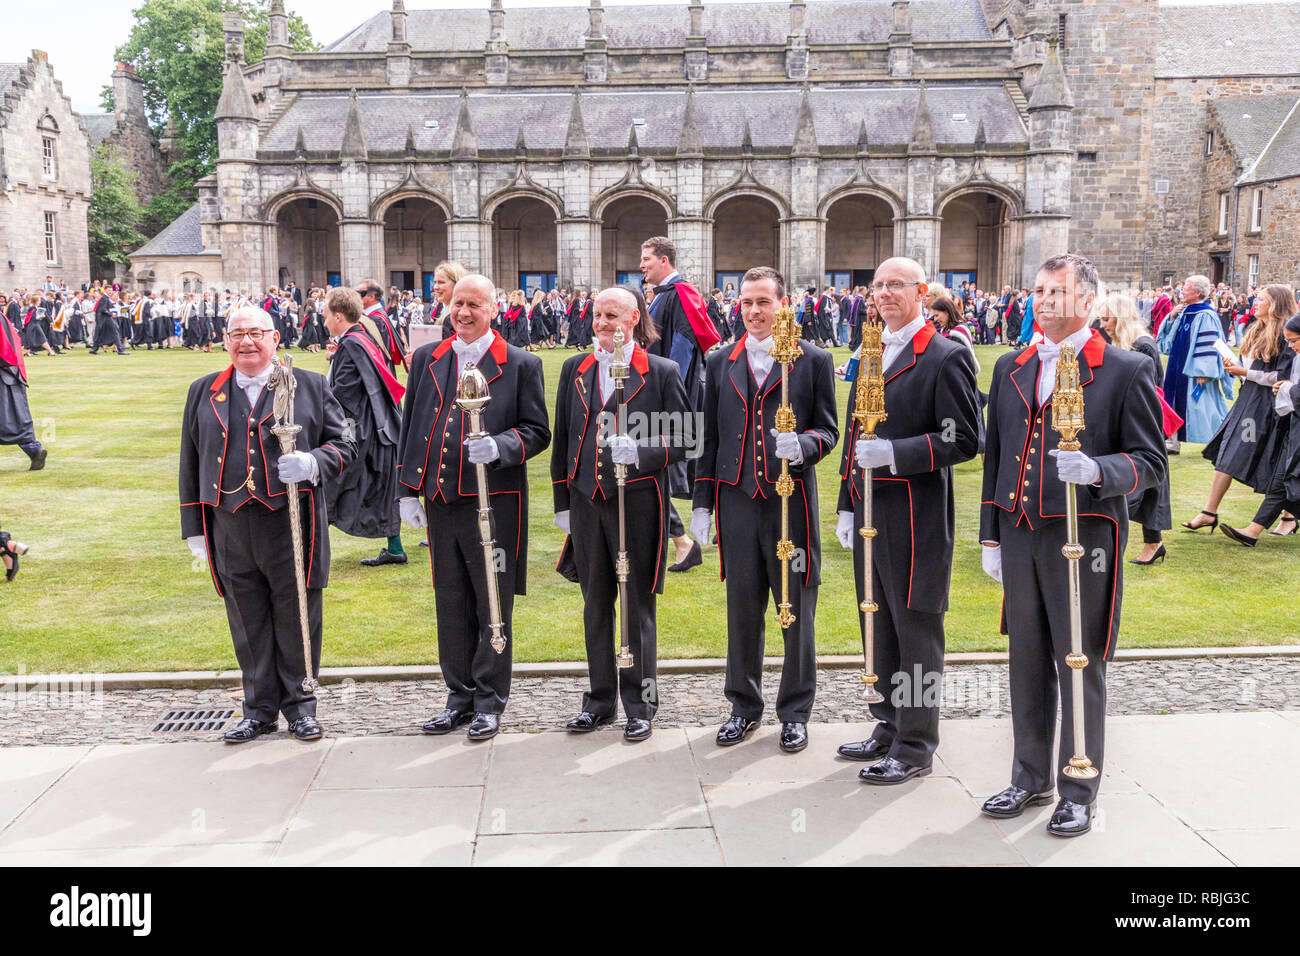 The mace bearers (the chief is the Bedelis) in St Salvators Quad after leading the procession for St Andrews University Graduation Day in June 2018 Stock Photo